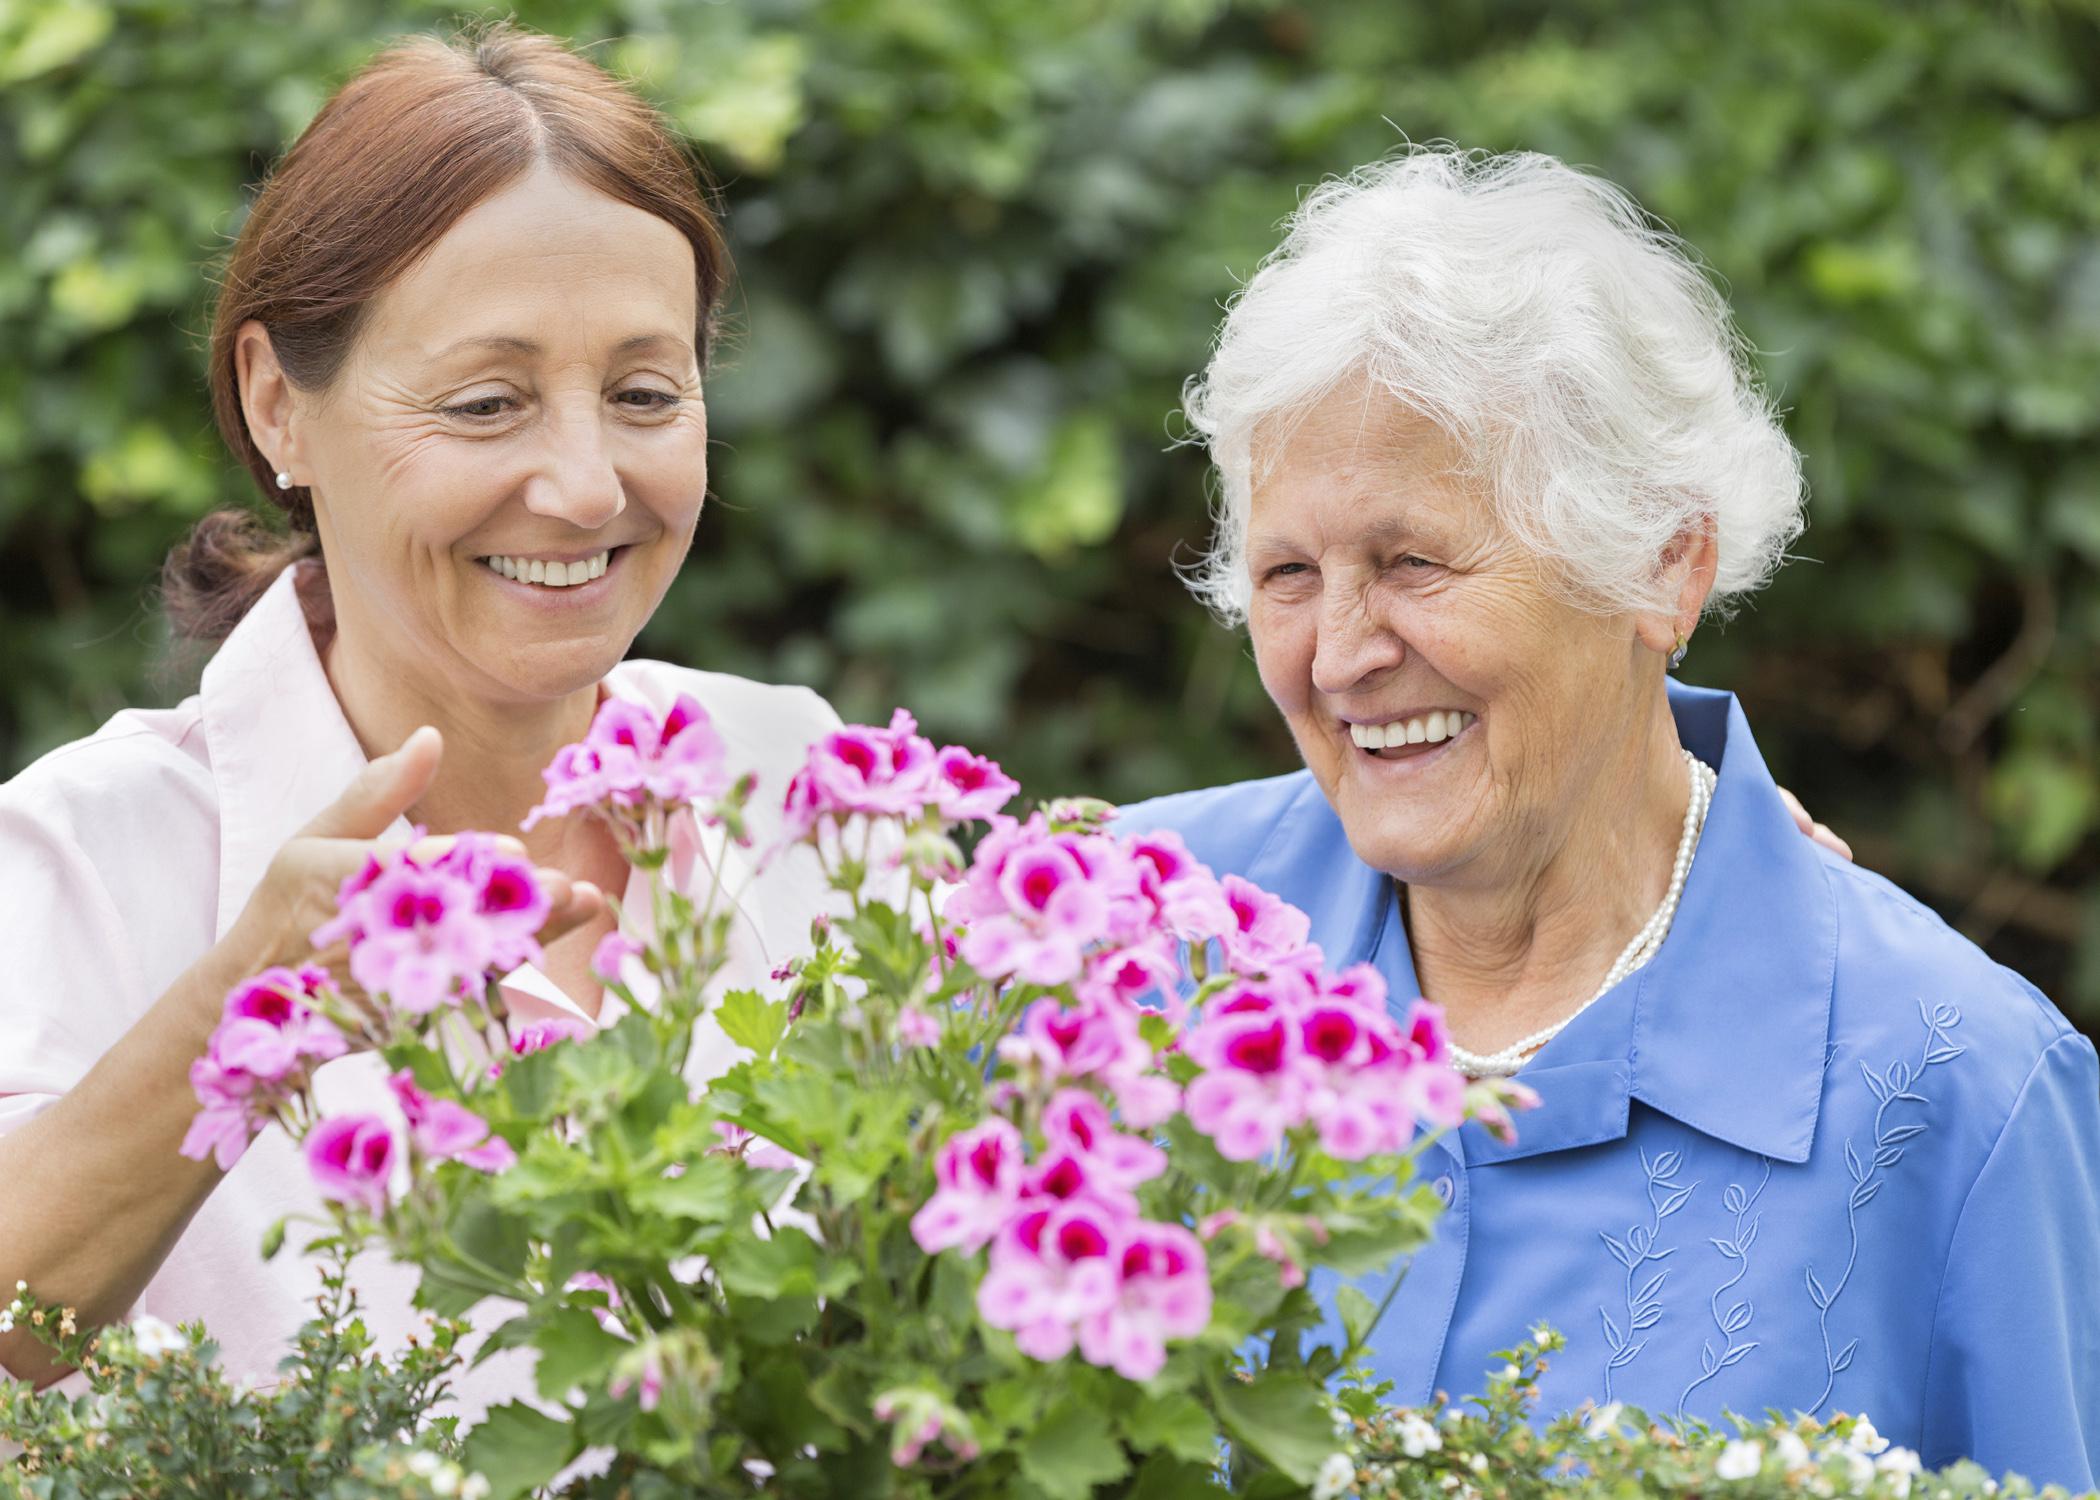 Milder forms of depression in older Americans responds to creative activities such as knitting or gardening as well as by getting more involved in the community through volunteering. (Photo by iStock)